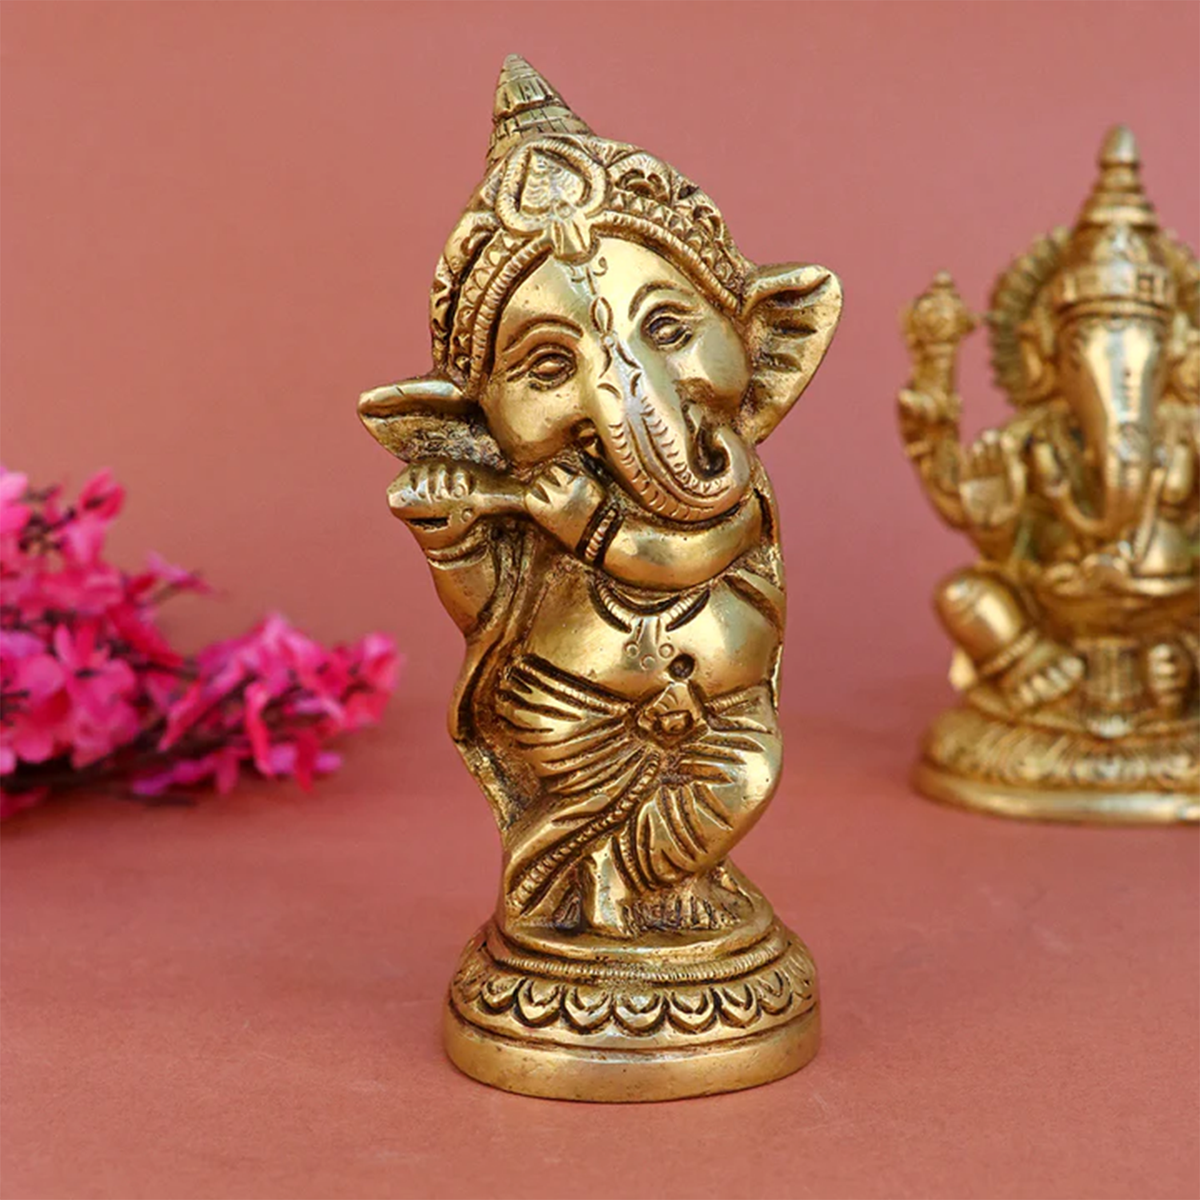 Shop Online Brass Statues and Idos in bangalore